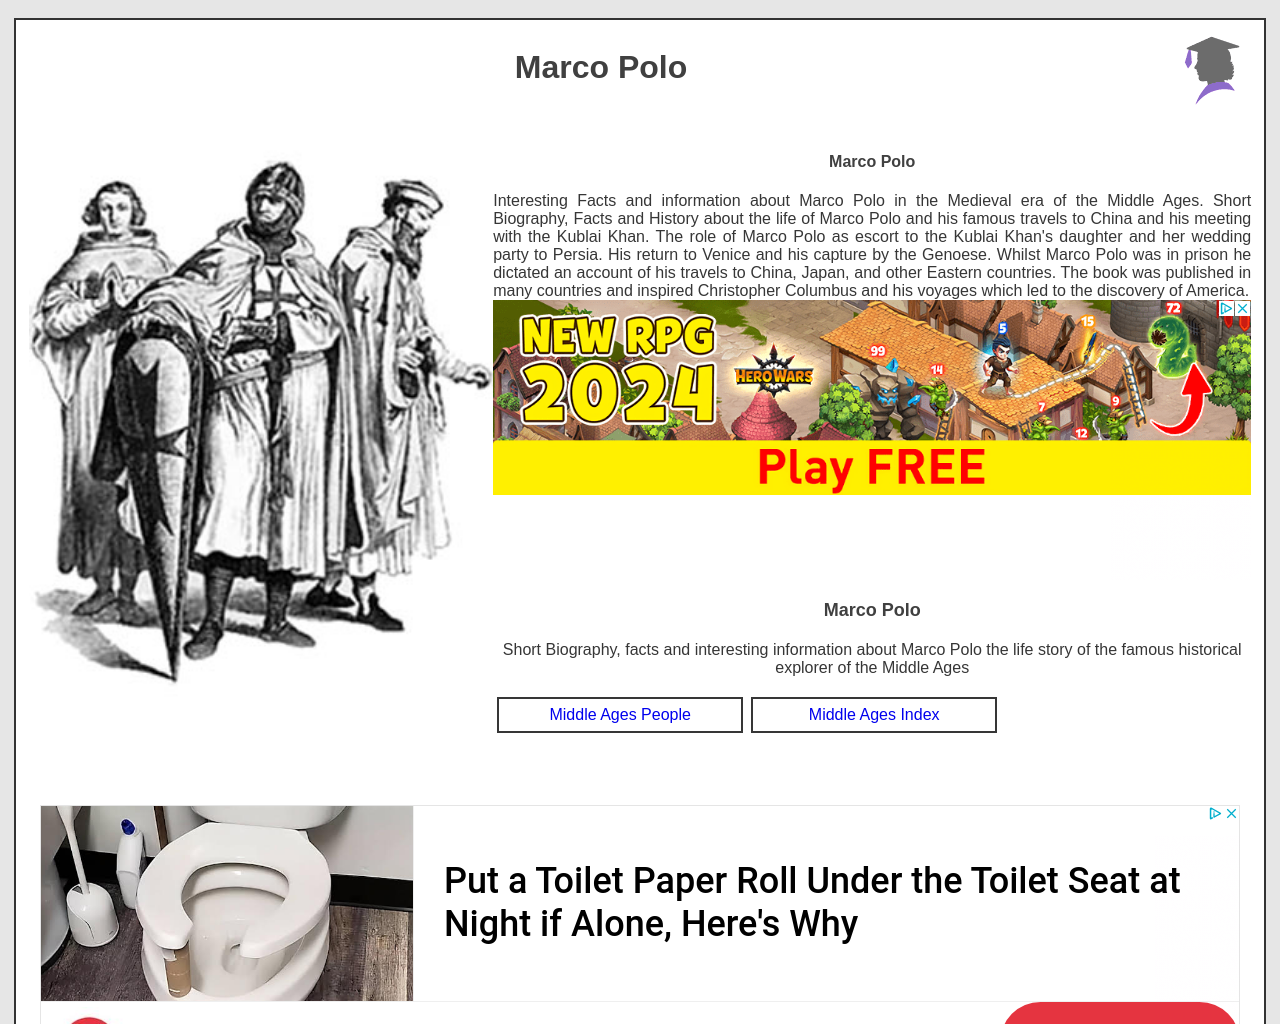 Marco Polo Facts